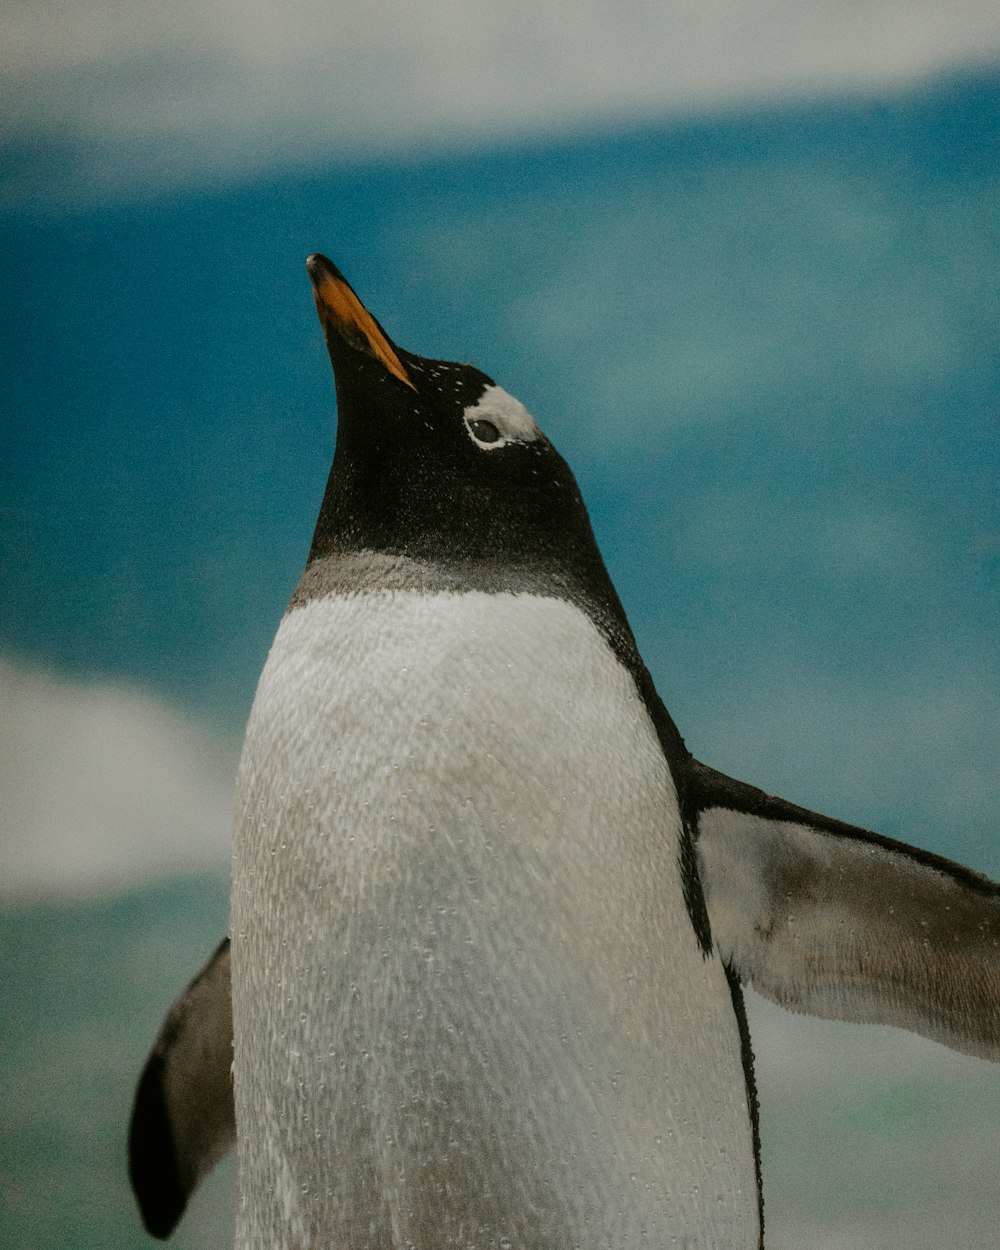 a close up of a penguin with its eyes closed